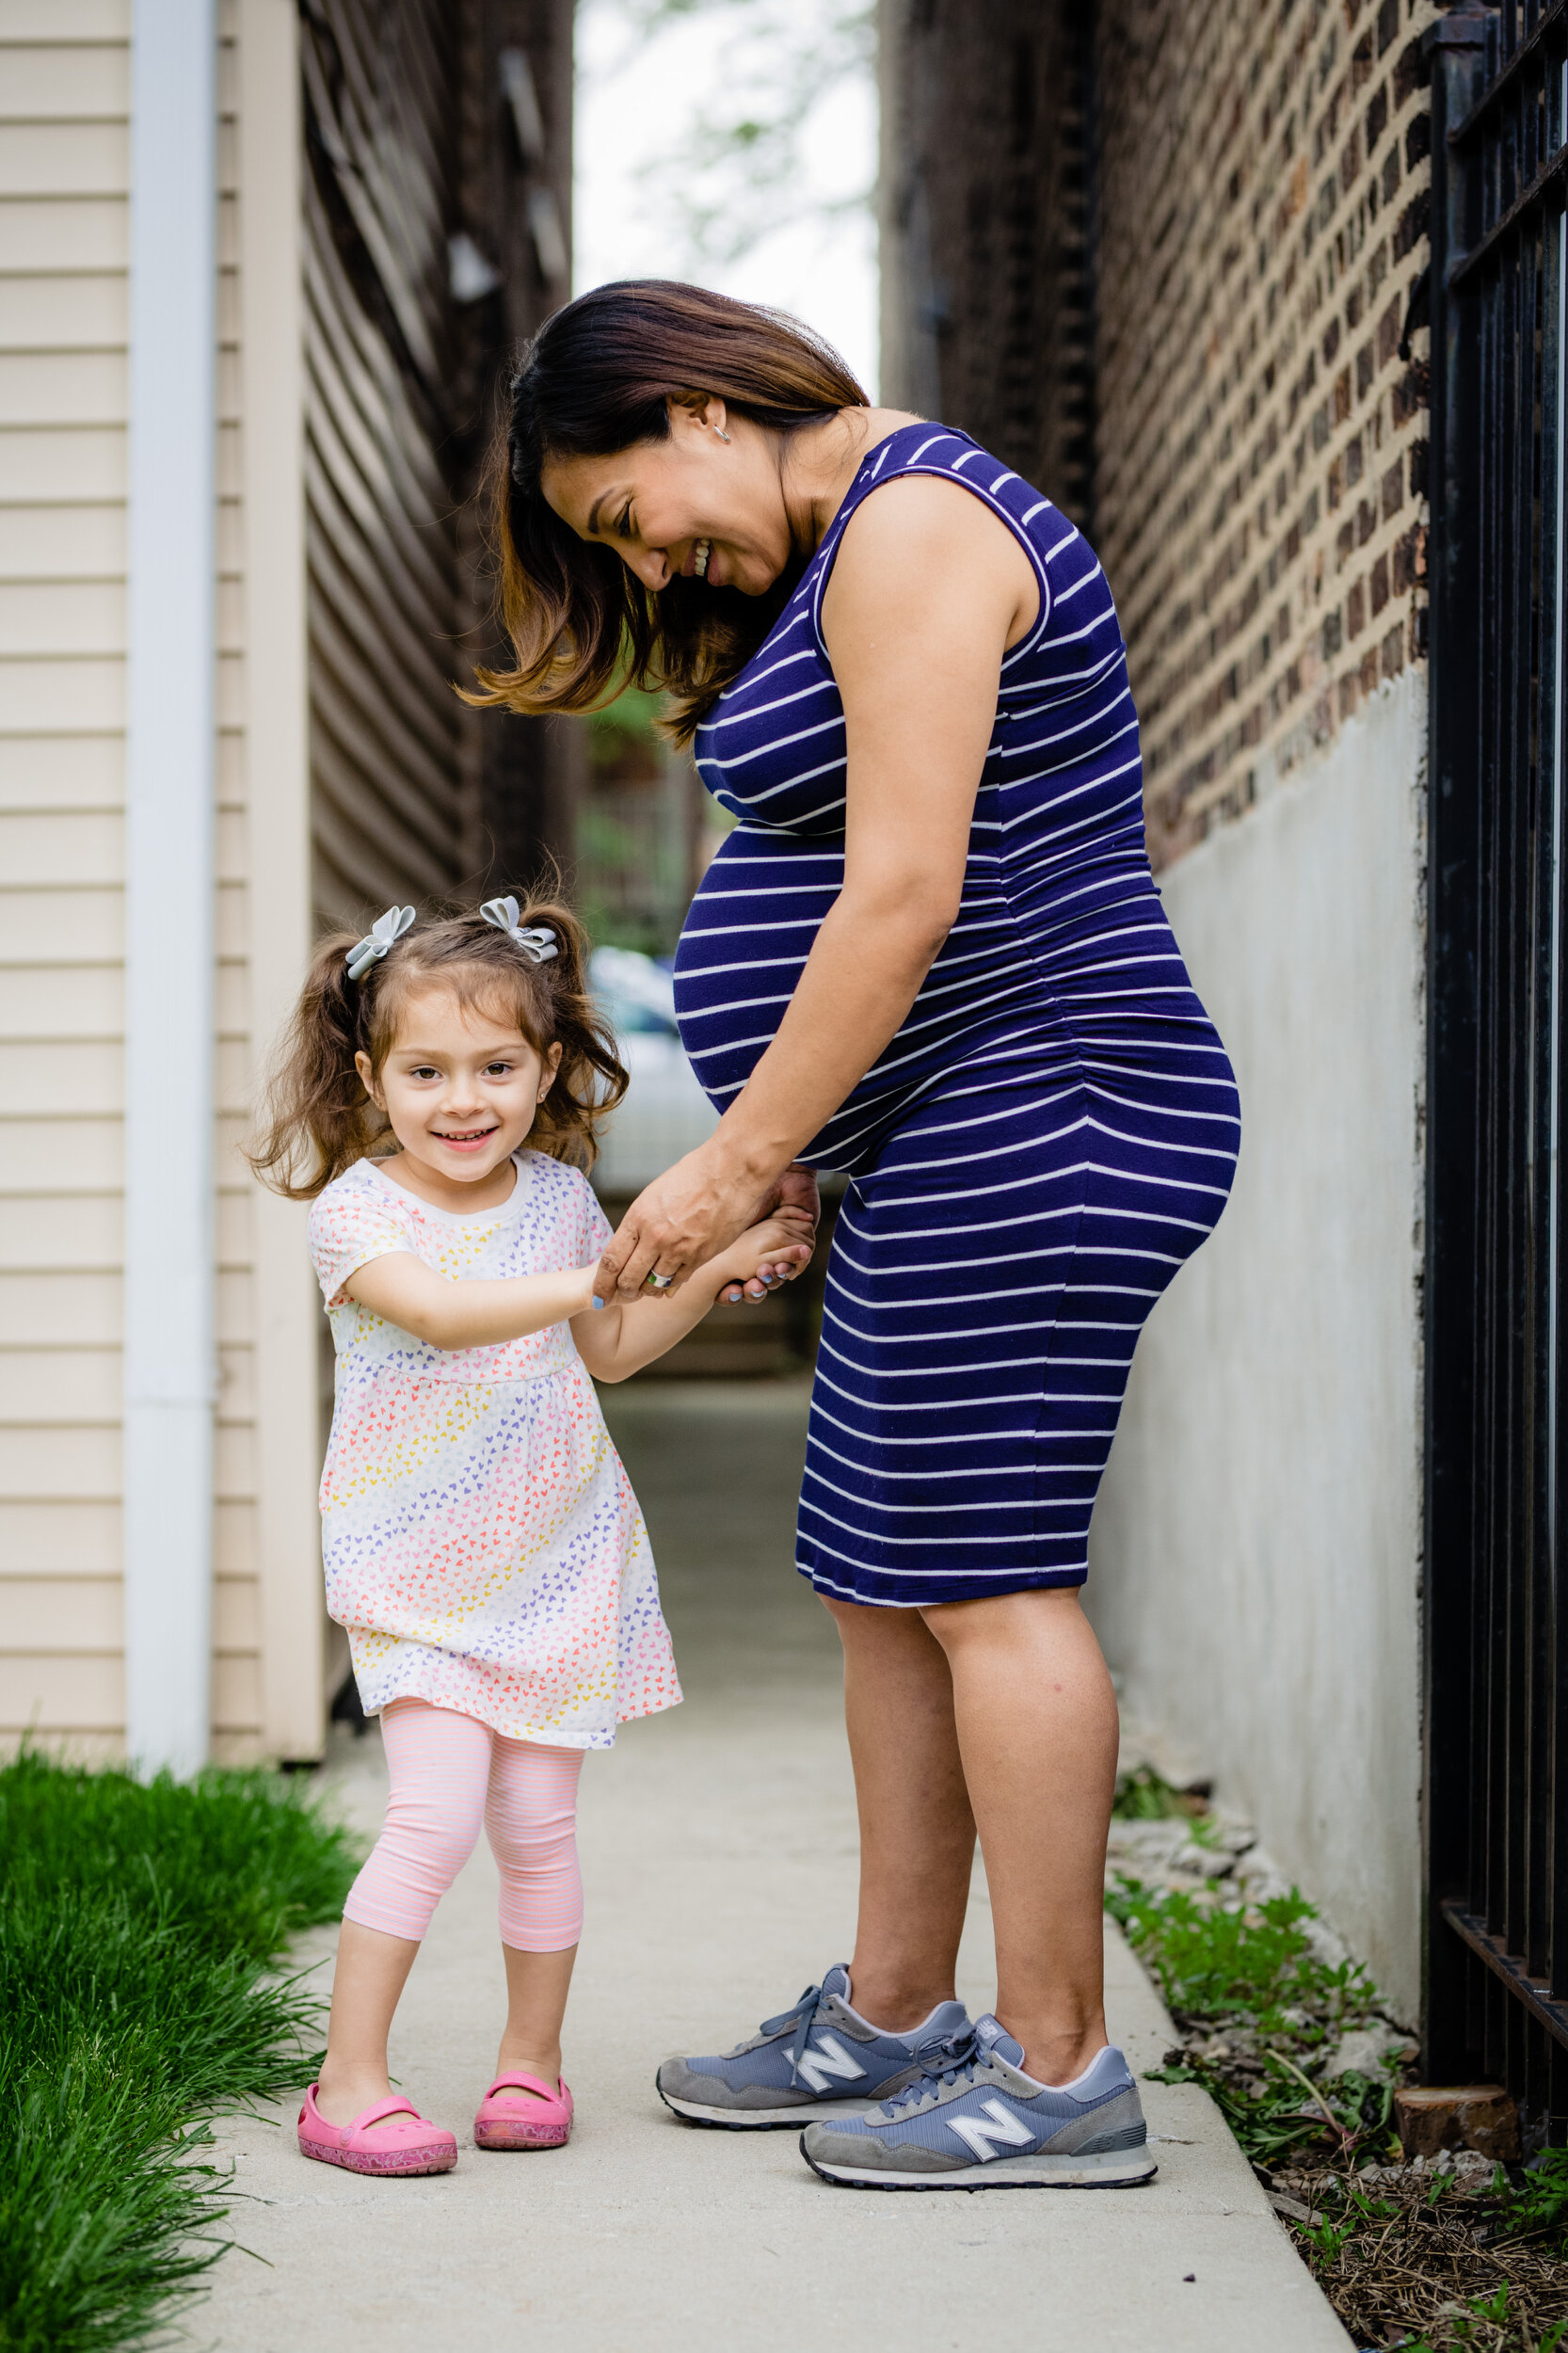 Mother and daughter maternity photo session: family portrait session photographed by J. Brown Photography.